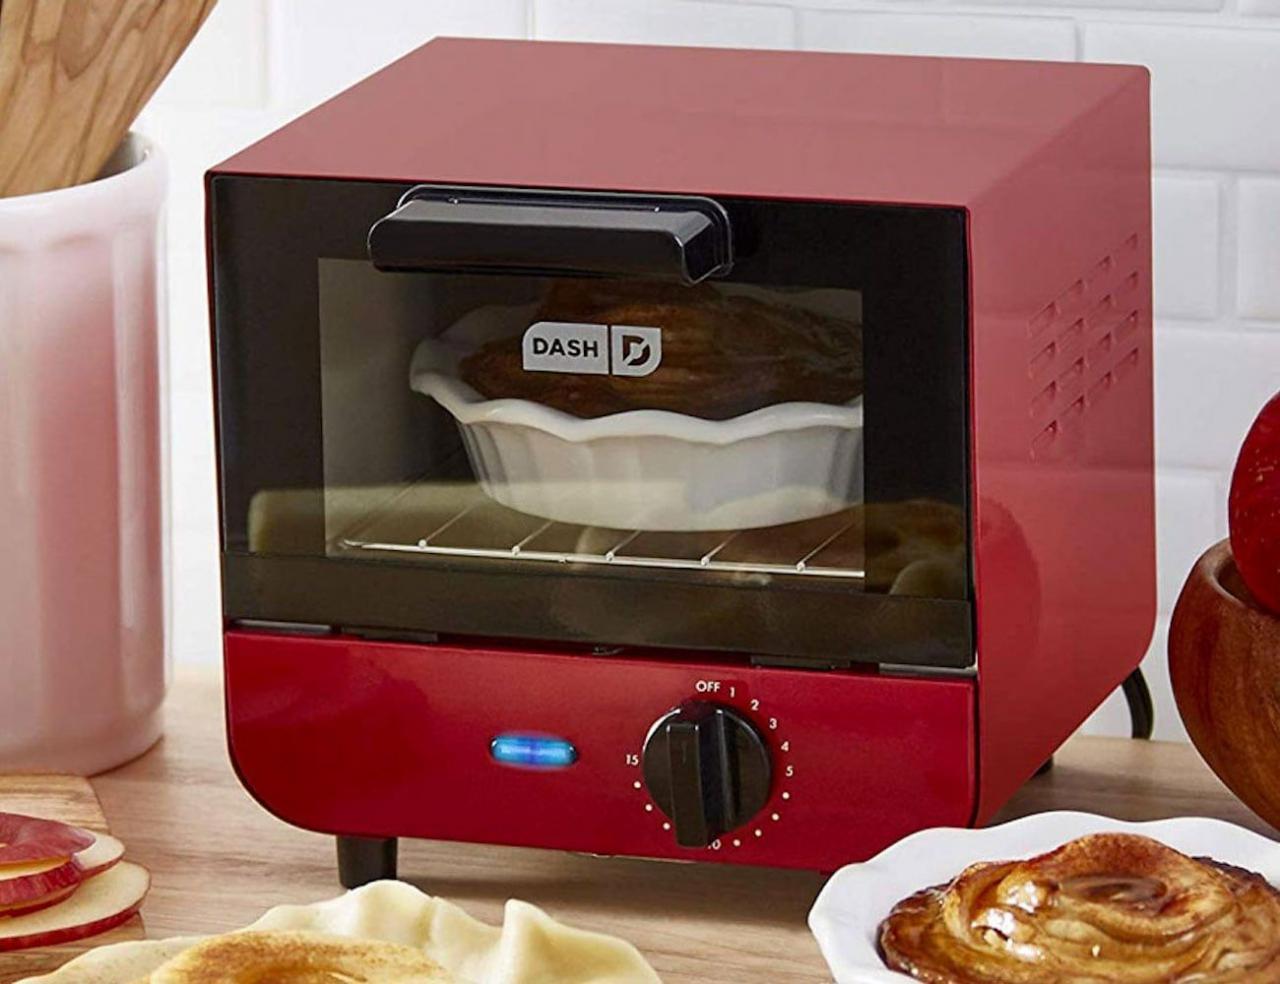 Dash Mini Toaster Oven is 550 watts of countertop cooking power Mini